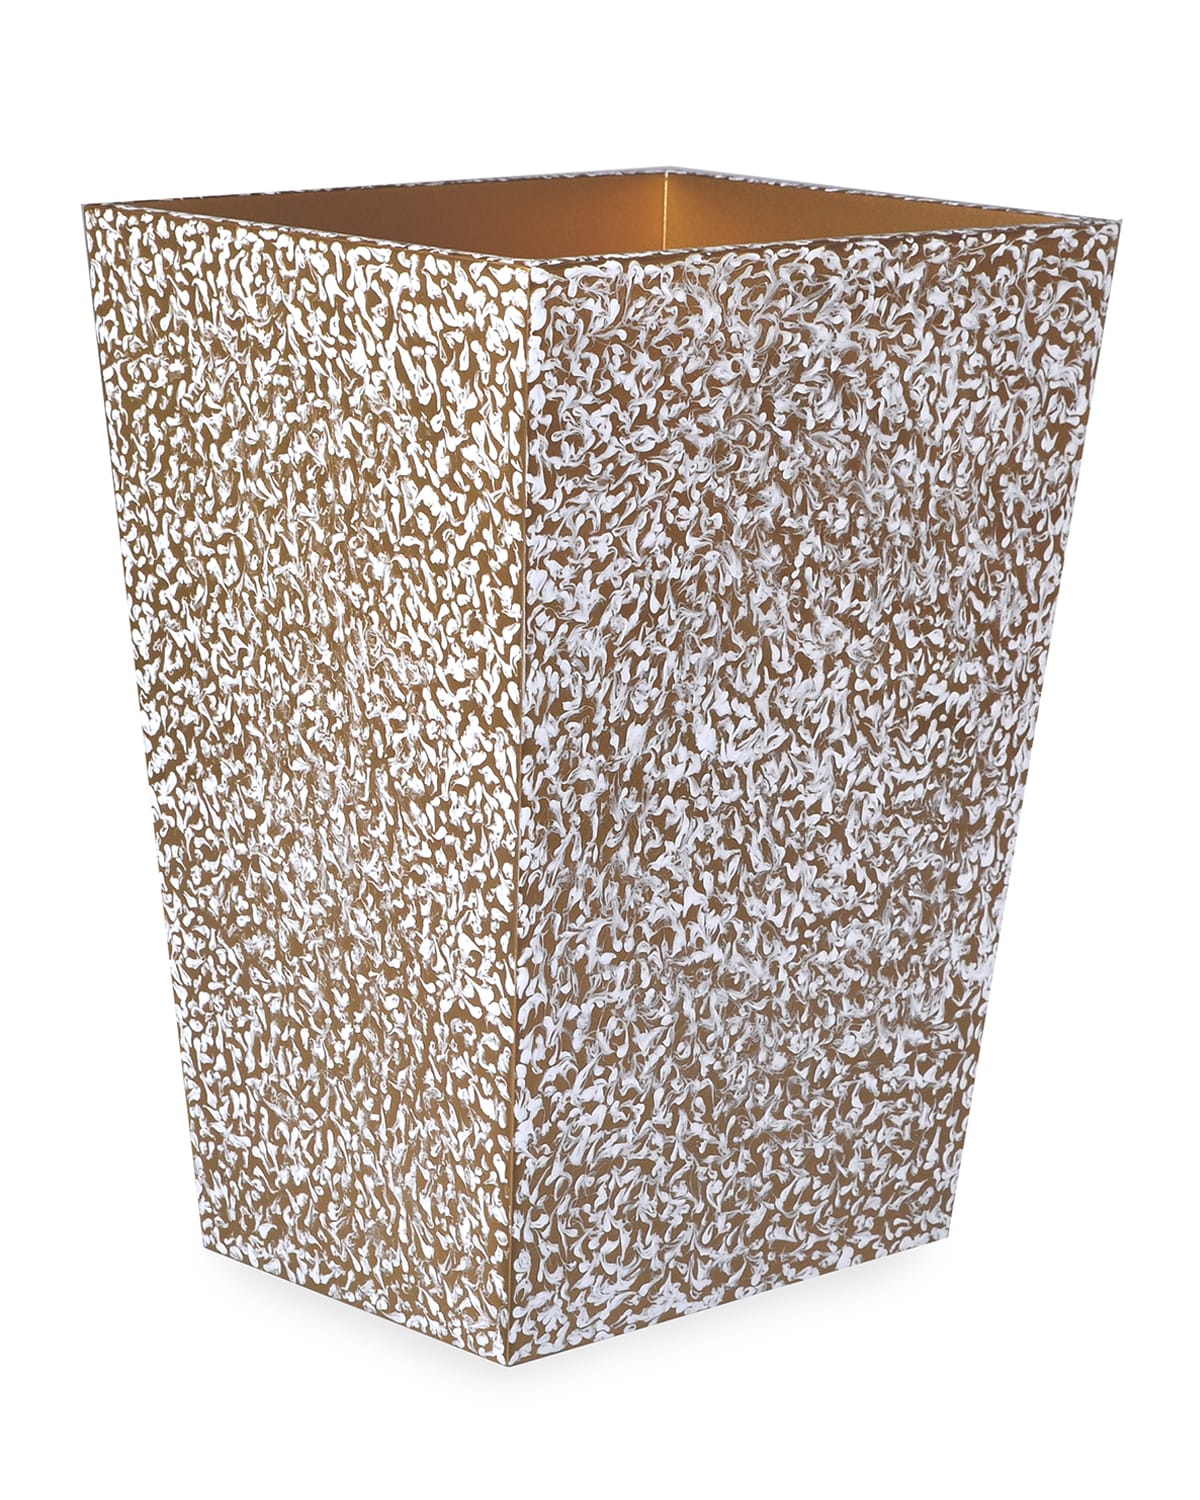 Image Mike & Ally Blizzard Straight Wastebasket with Liner